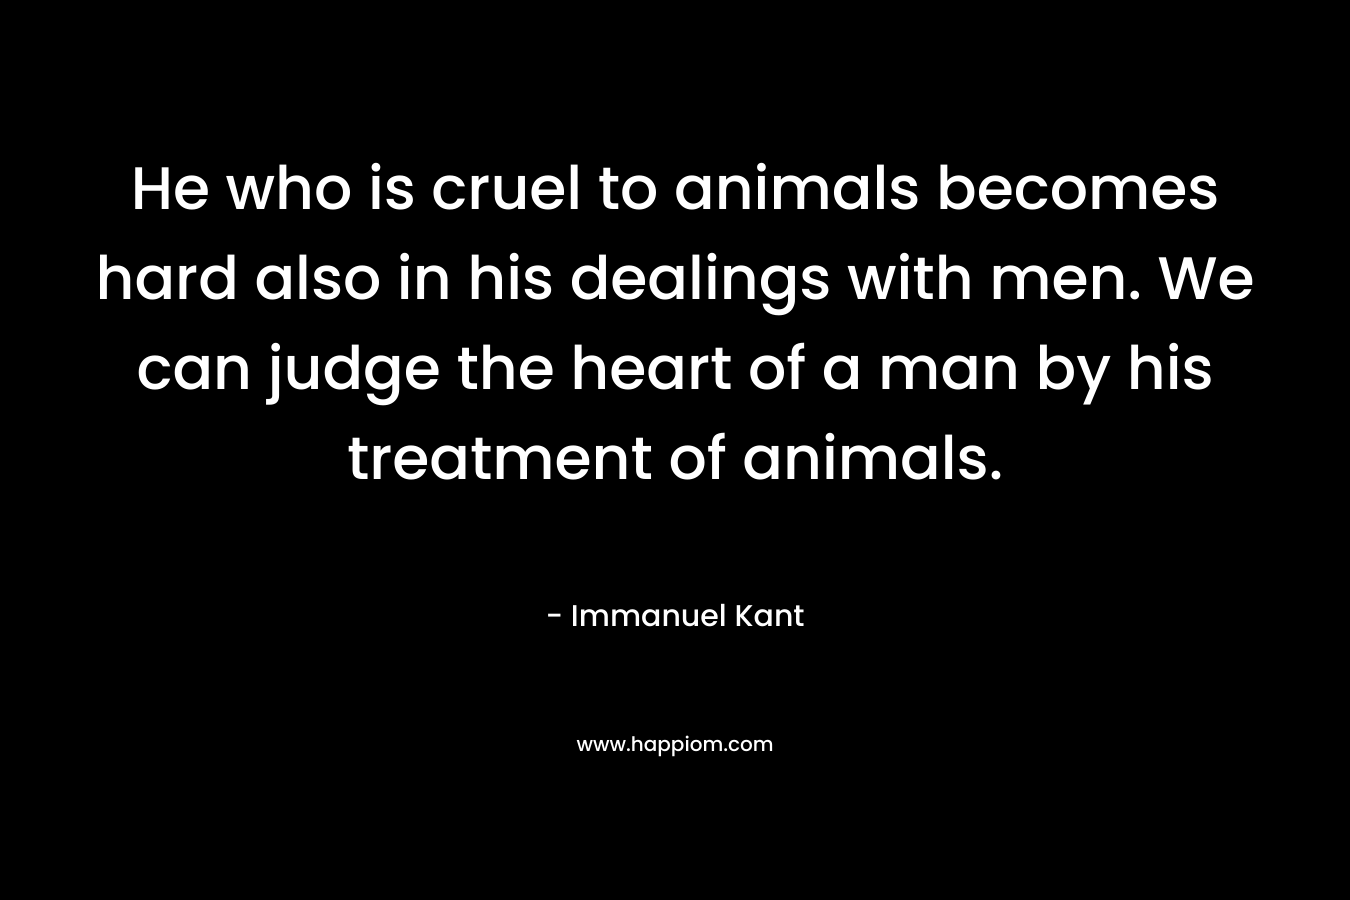 He who is cruel to animals becomes hard also in his dealings with men. We can judge the heart of a man by his treatment of animals. – Immanuel Kant